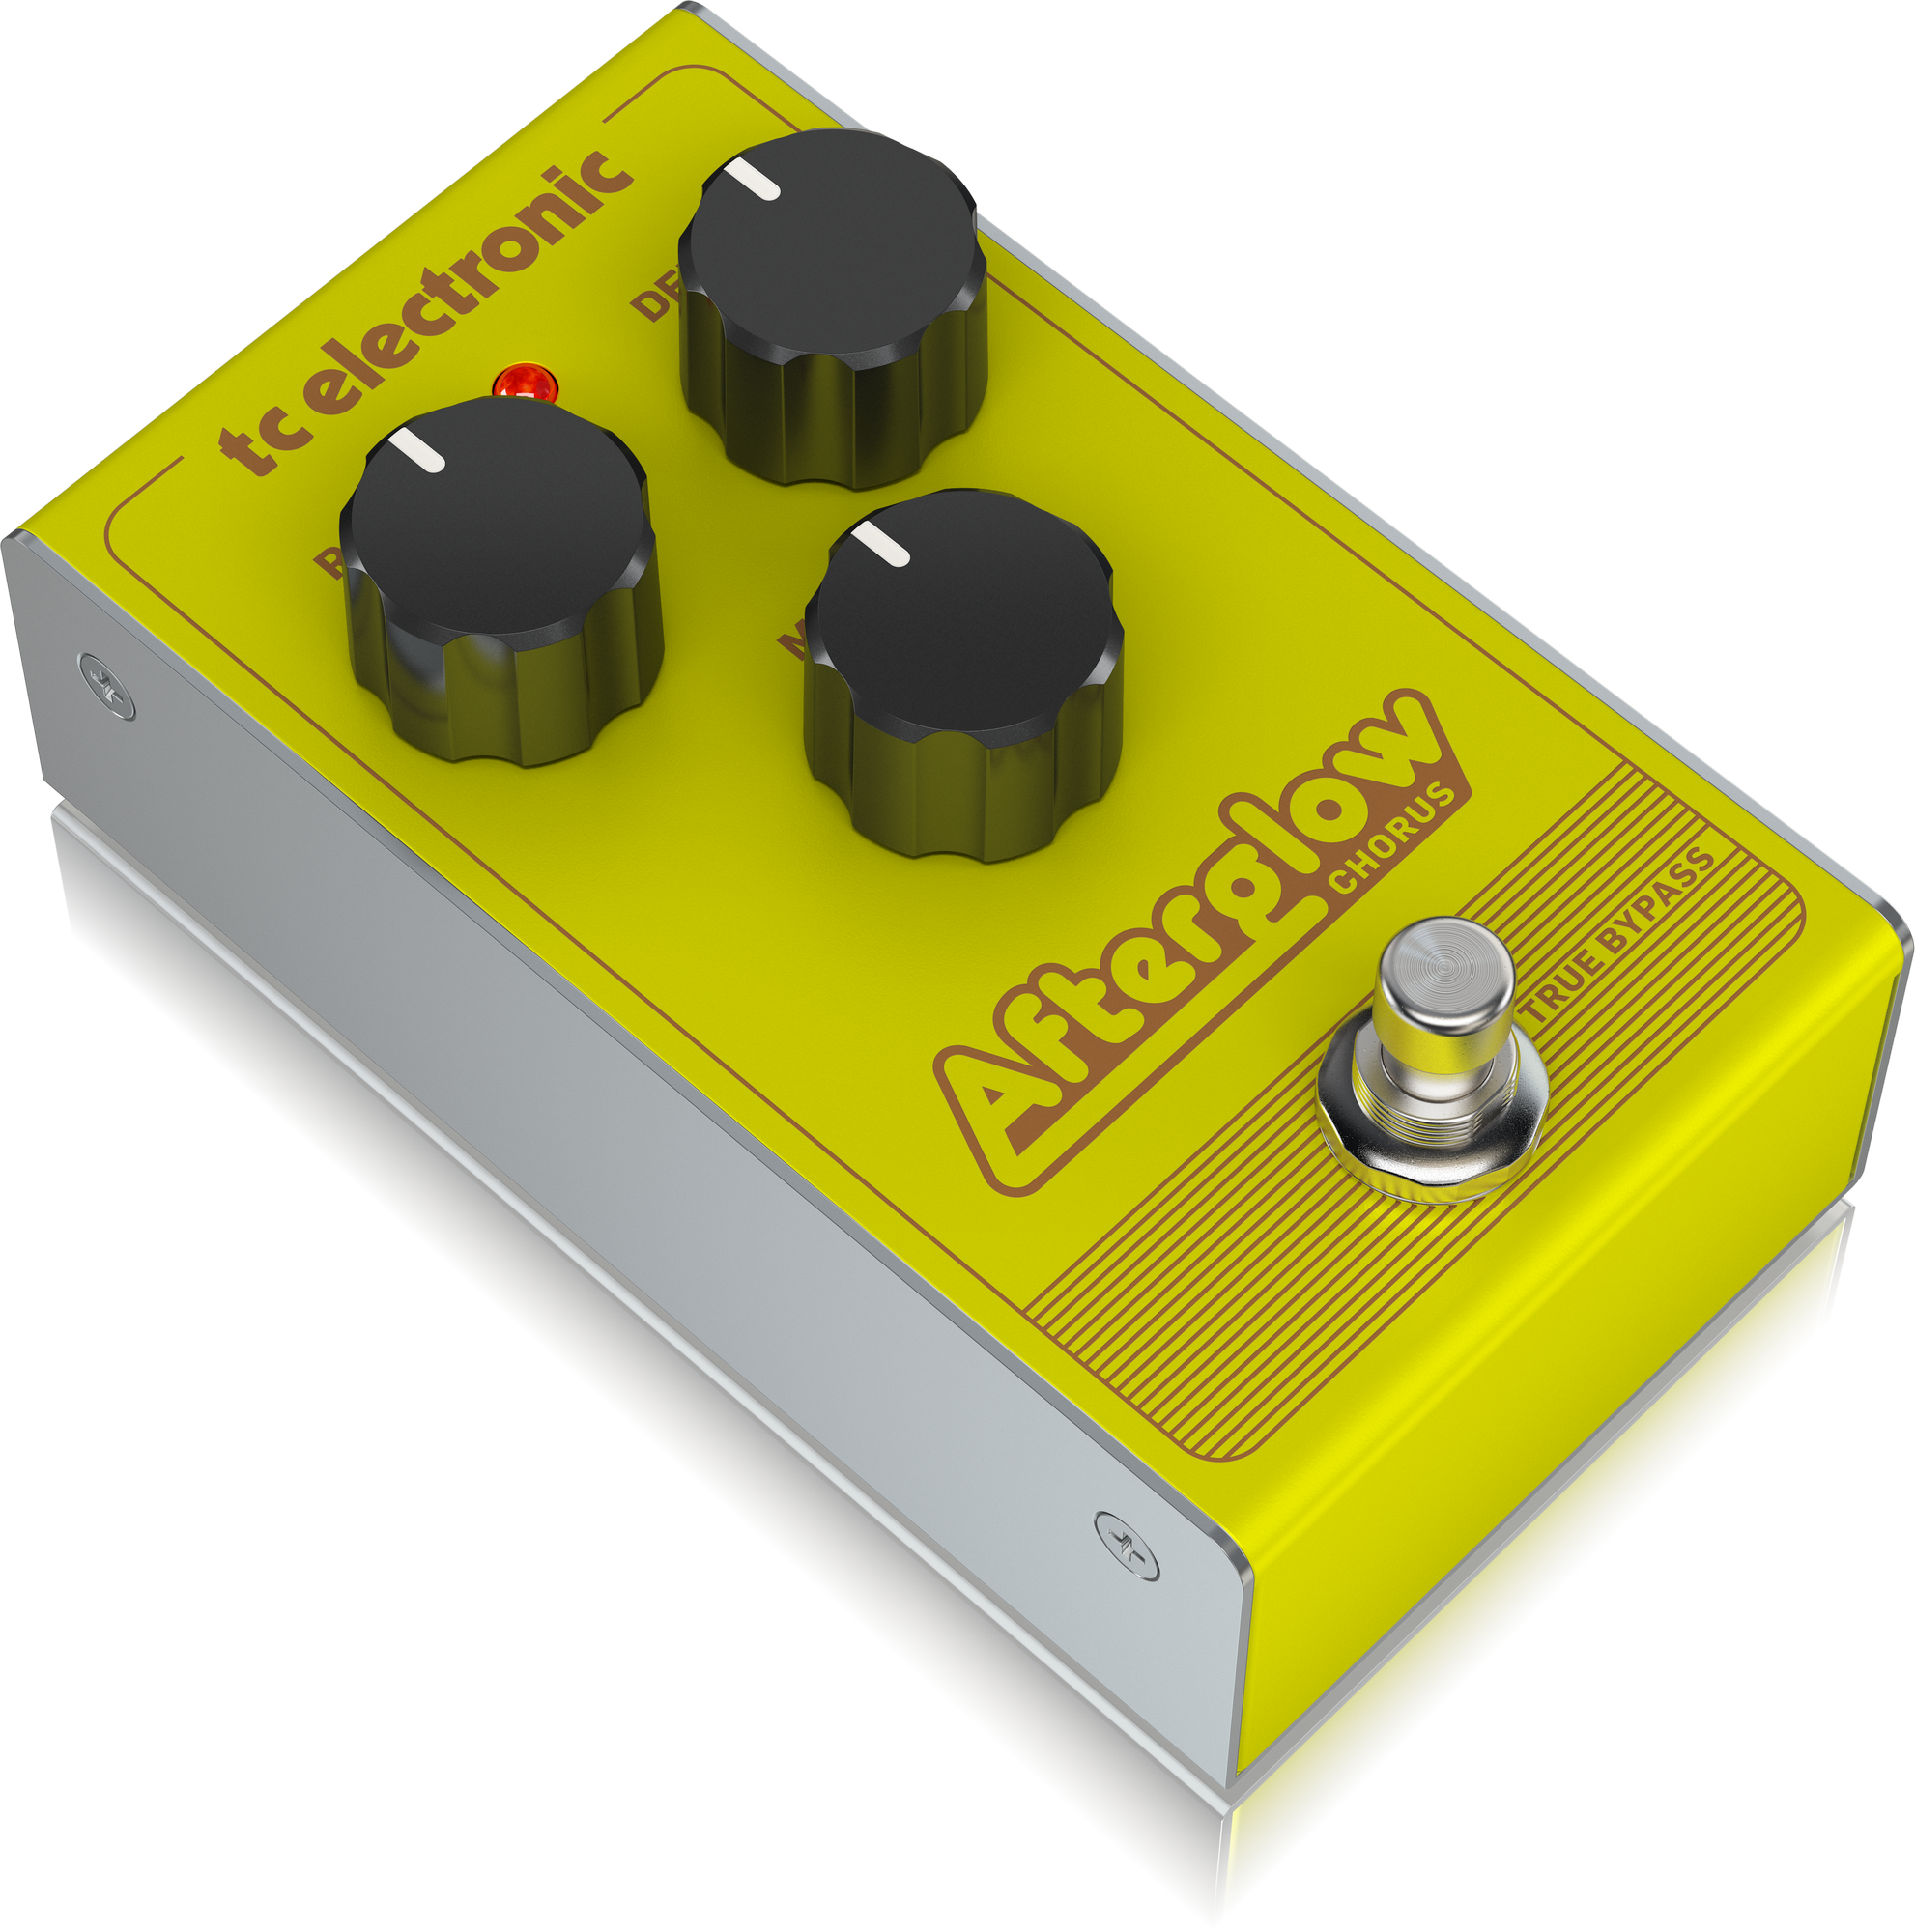 TC Electronic Afterglow Chorus Vintage-Style Pedal with All-Analogue Bucket-Brigade Circuit, TC ELECTRONIC, EFFECTS, tc-electronic-effects-tc-afterglow-chorus, ZOSO MUSIC SDN BHD